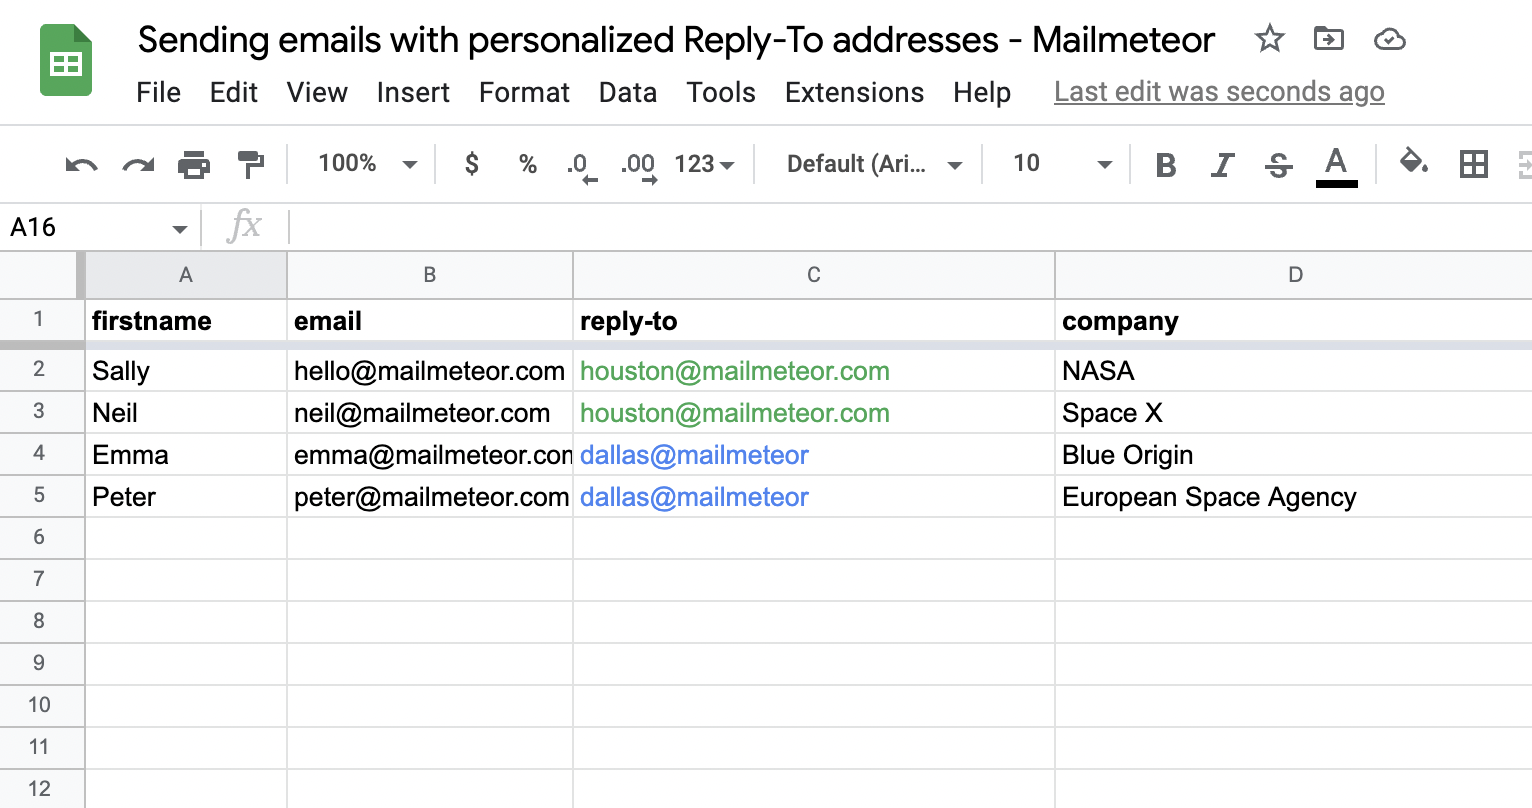 Sending emails with personalized Reply-To addresses in Google Sheets